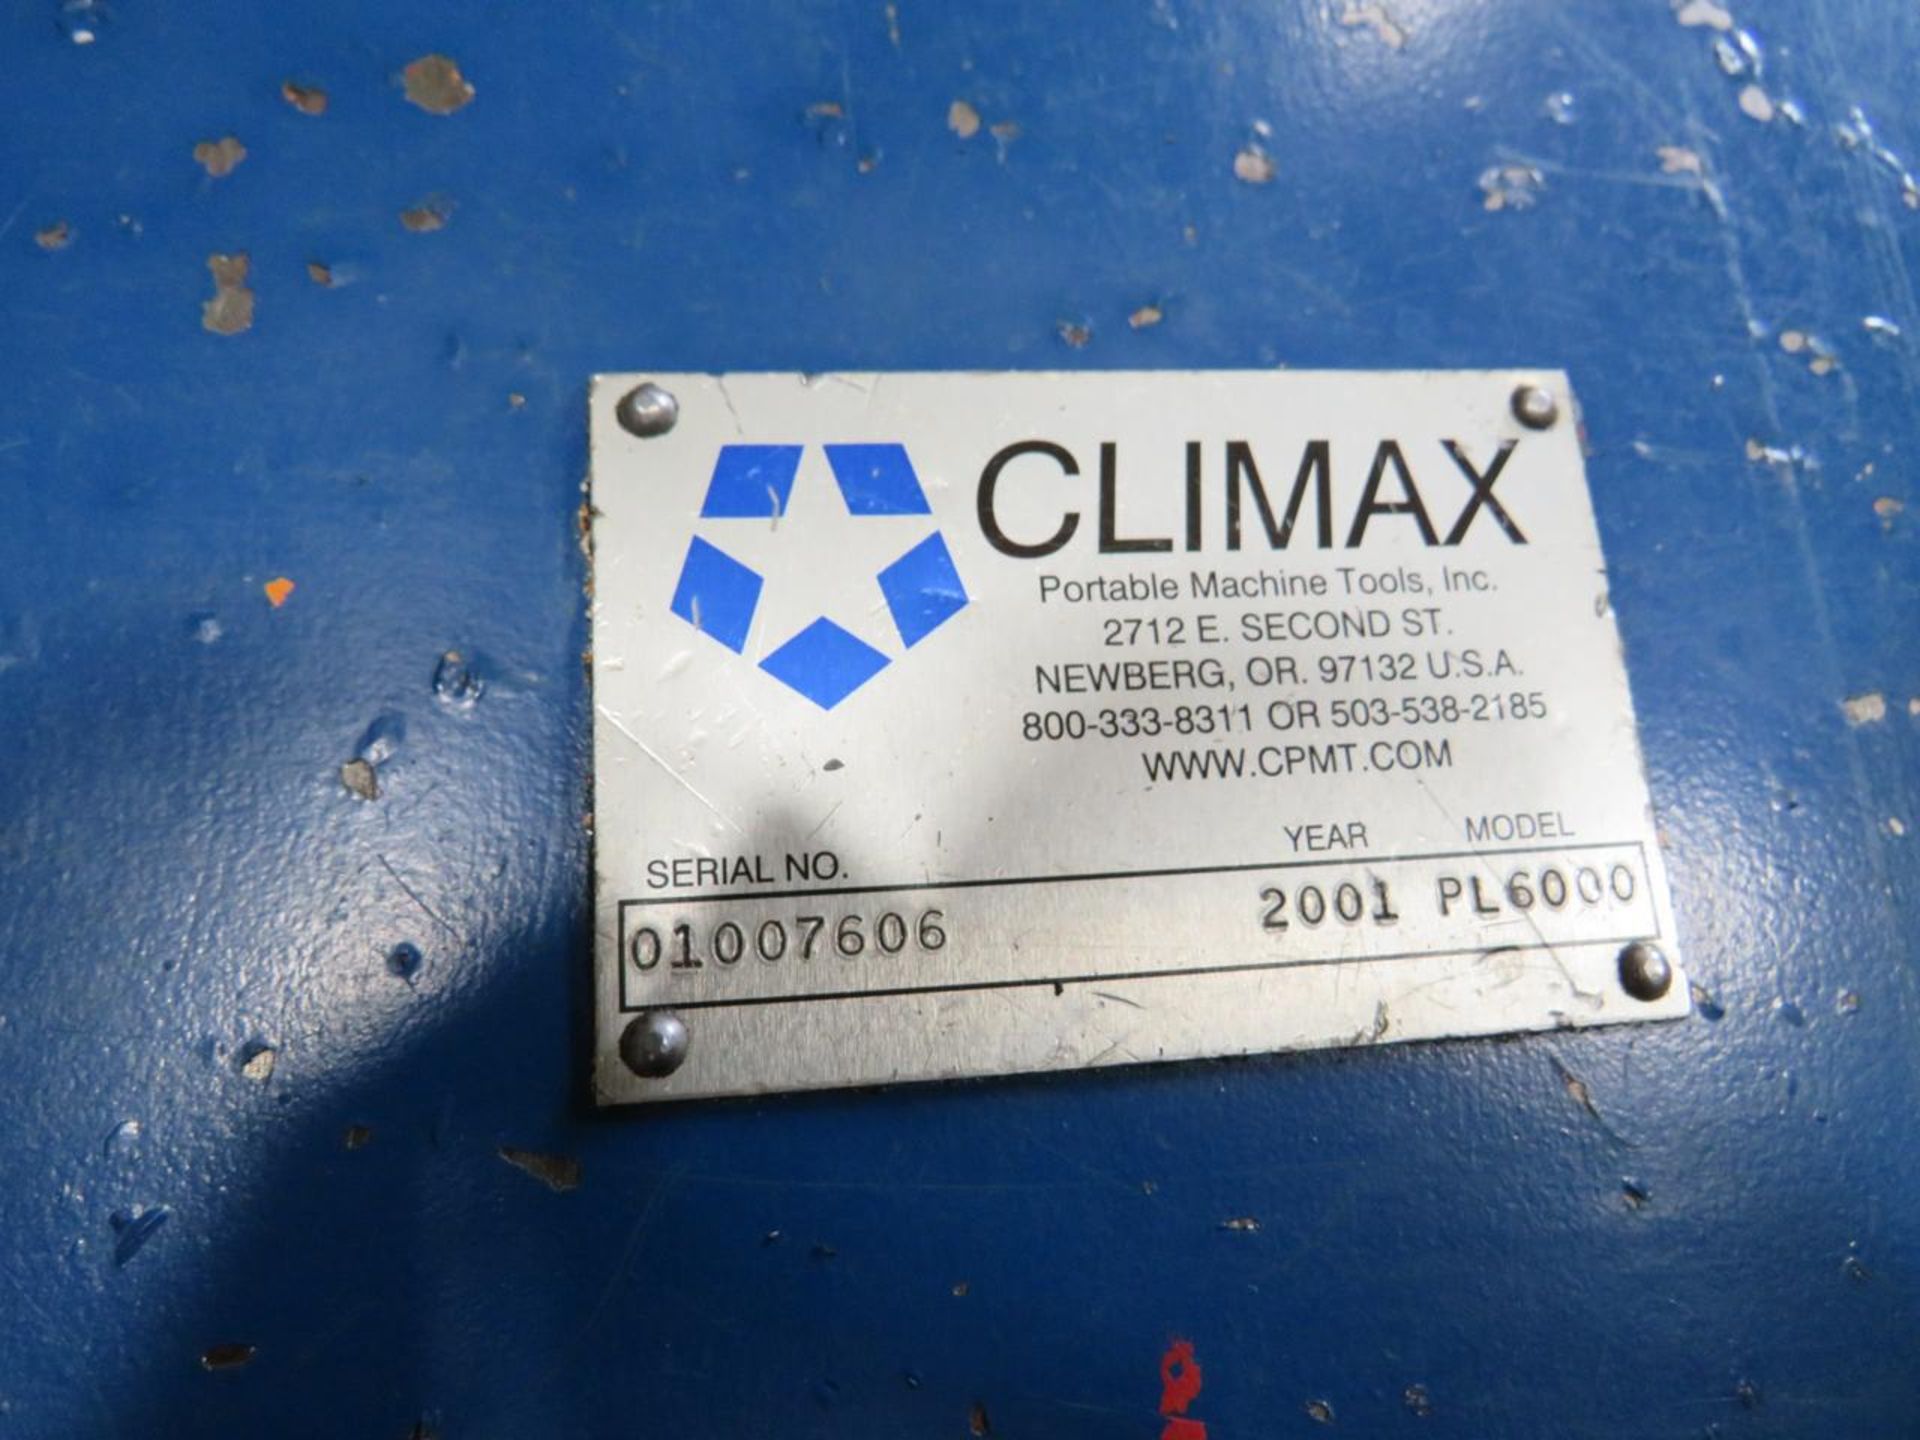 2001 Climax PL6000 Portable Mill - Image 3 of 6